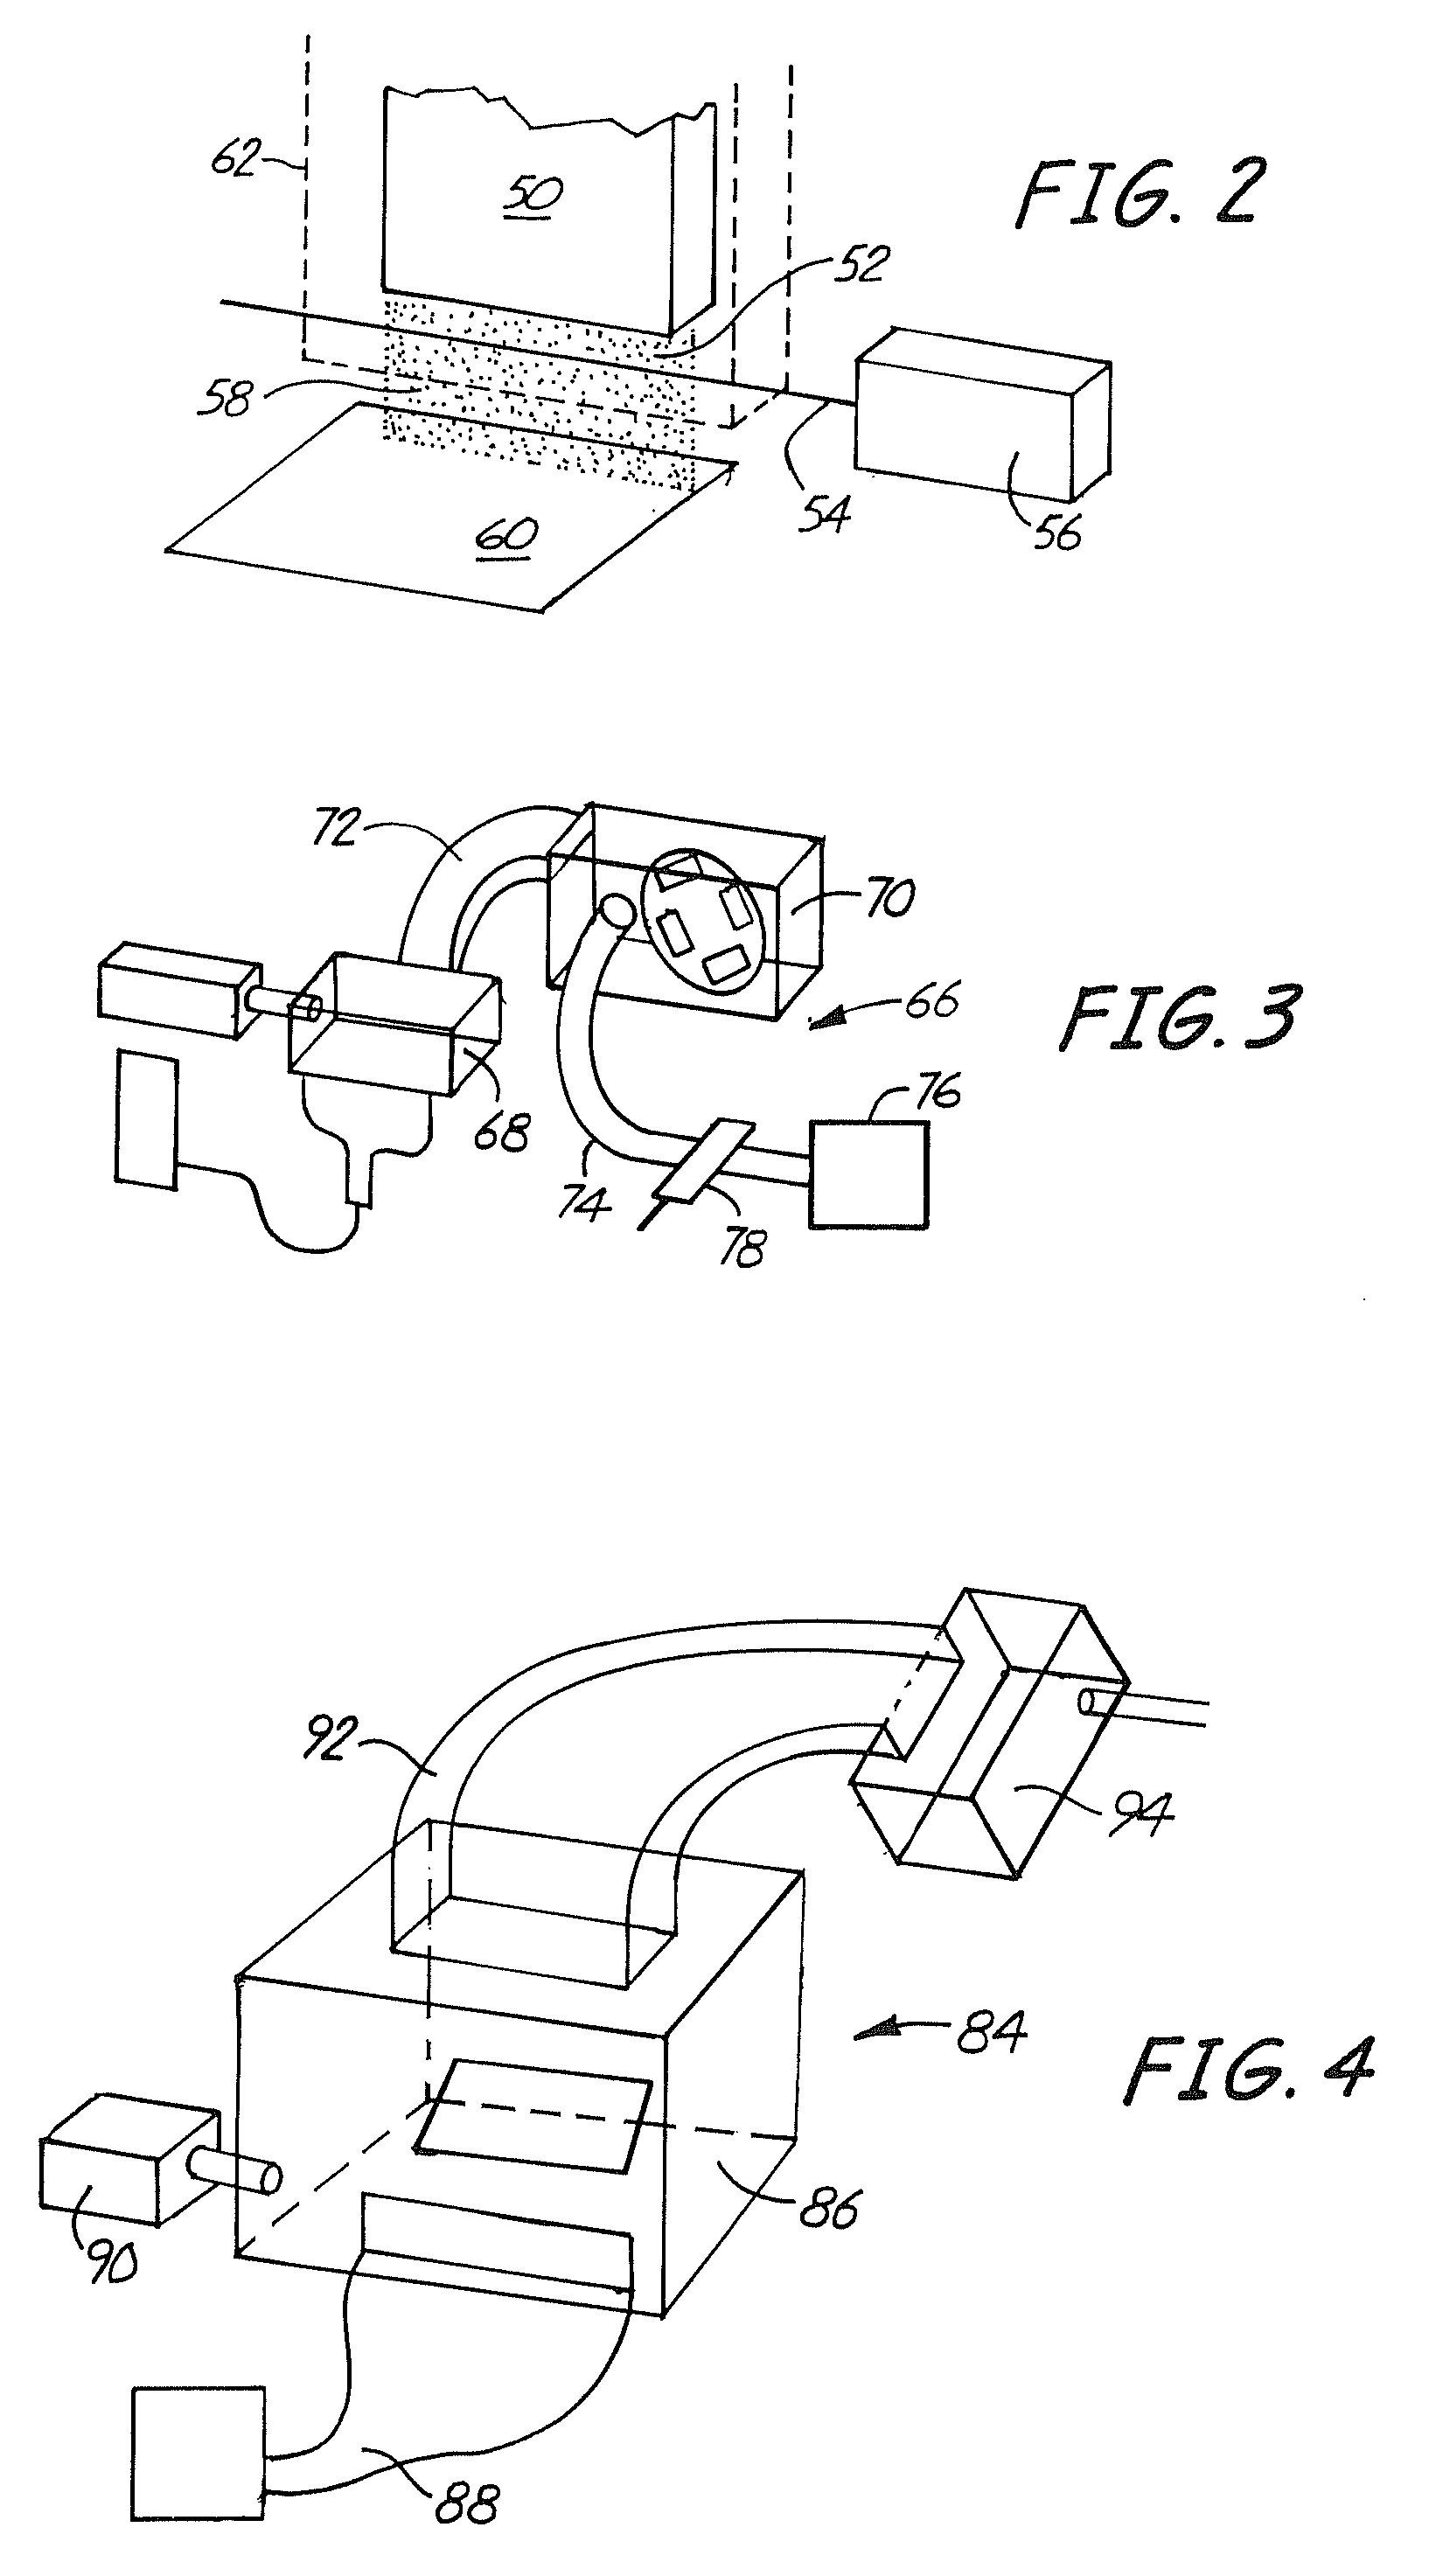 Apparatus for coating formation by light reactive deposition